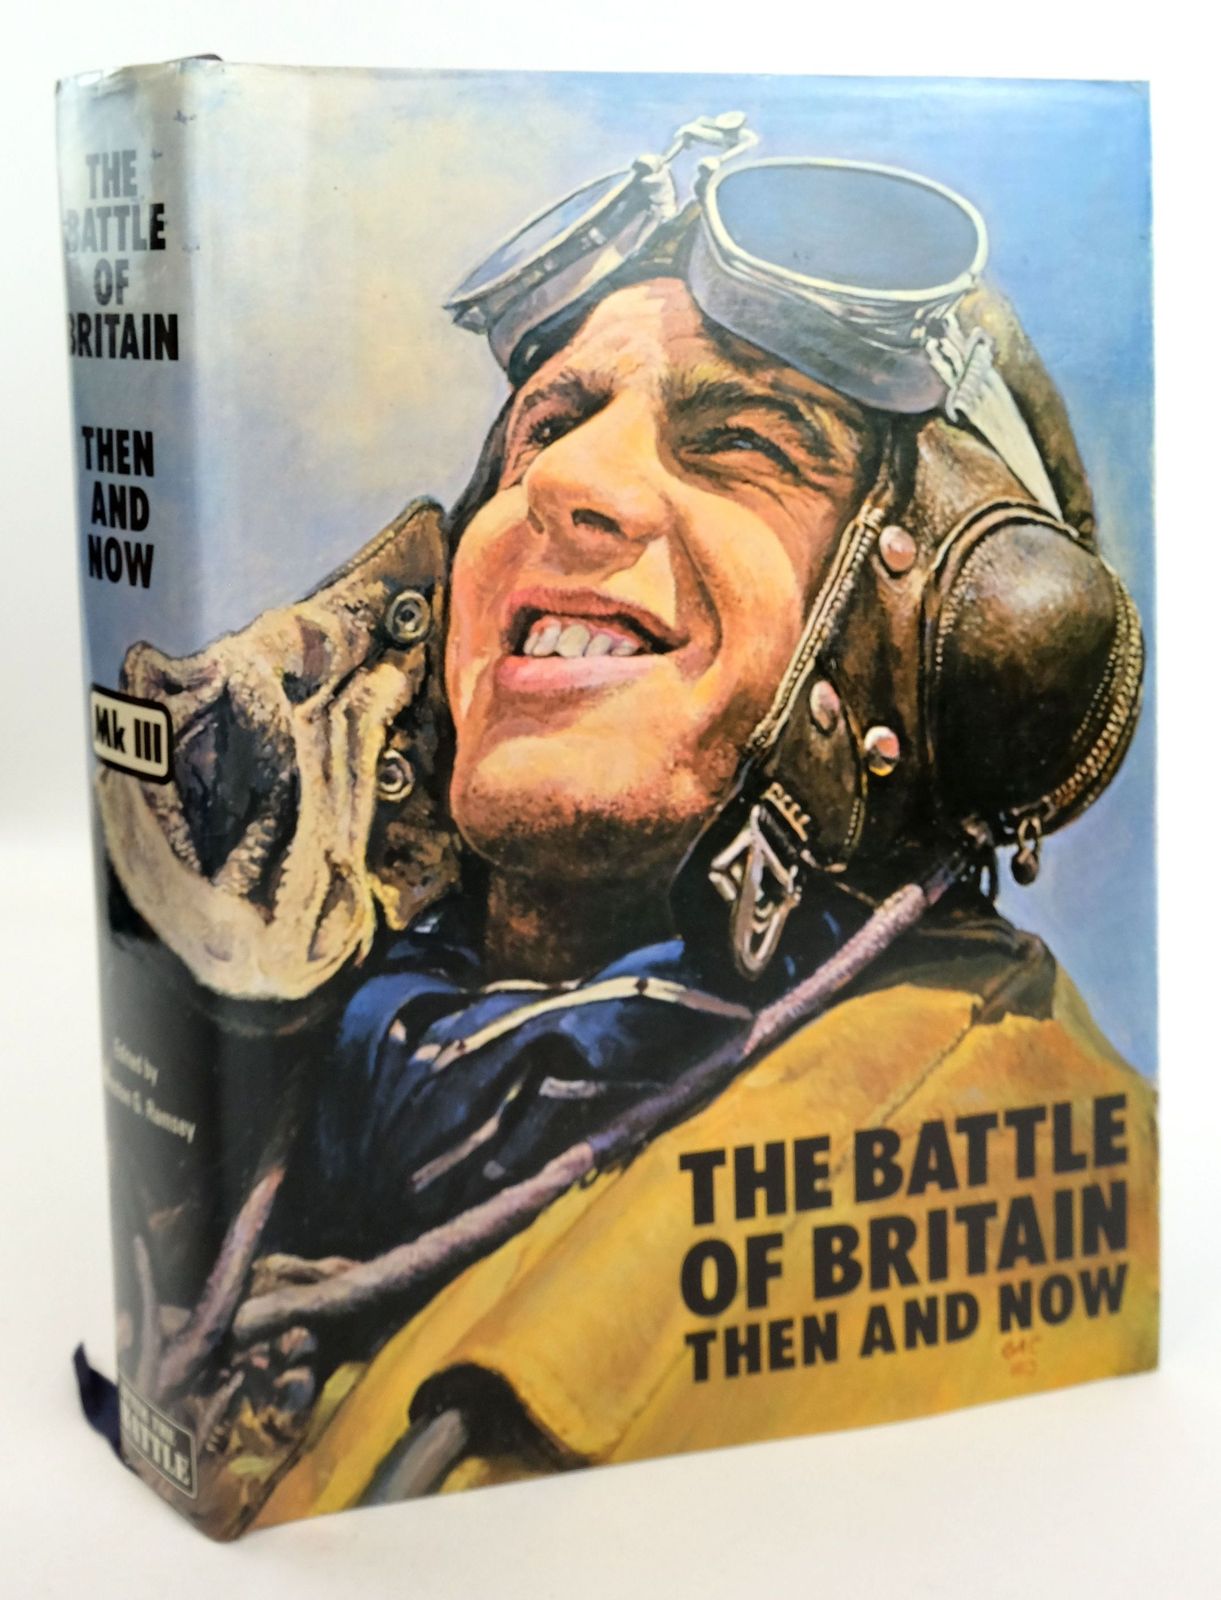 Photo of THE BATTLE OF BRITAIN THEN AND NOW written by Ramsey, Winston G. published by Battle of Britain Prints International Ltd. (STOCK CODE: 1819433)  for sale by Stella & Rose's Books